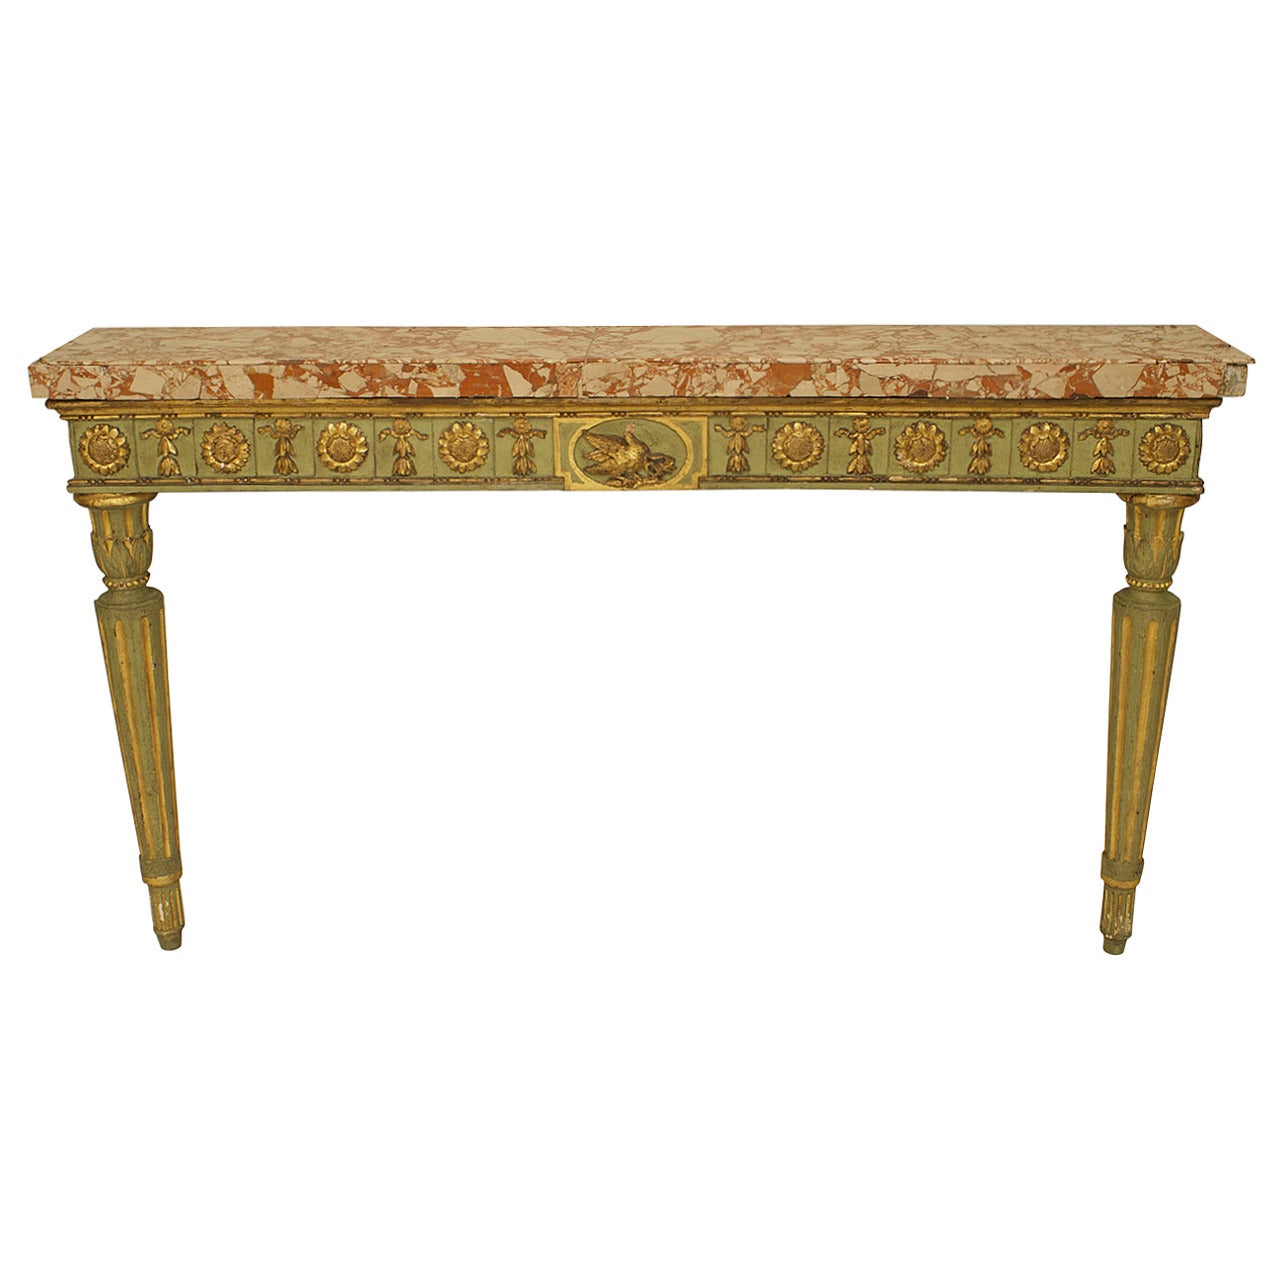 Italian Neo-Classic Gilt and Marble Top Console Table